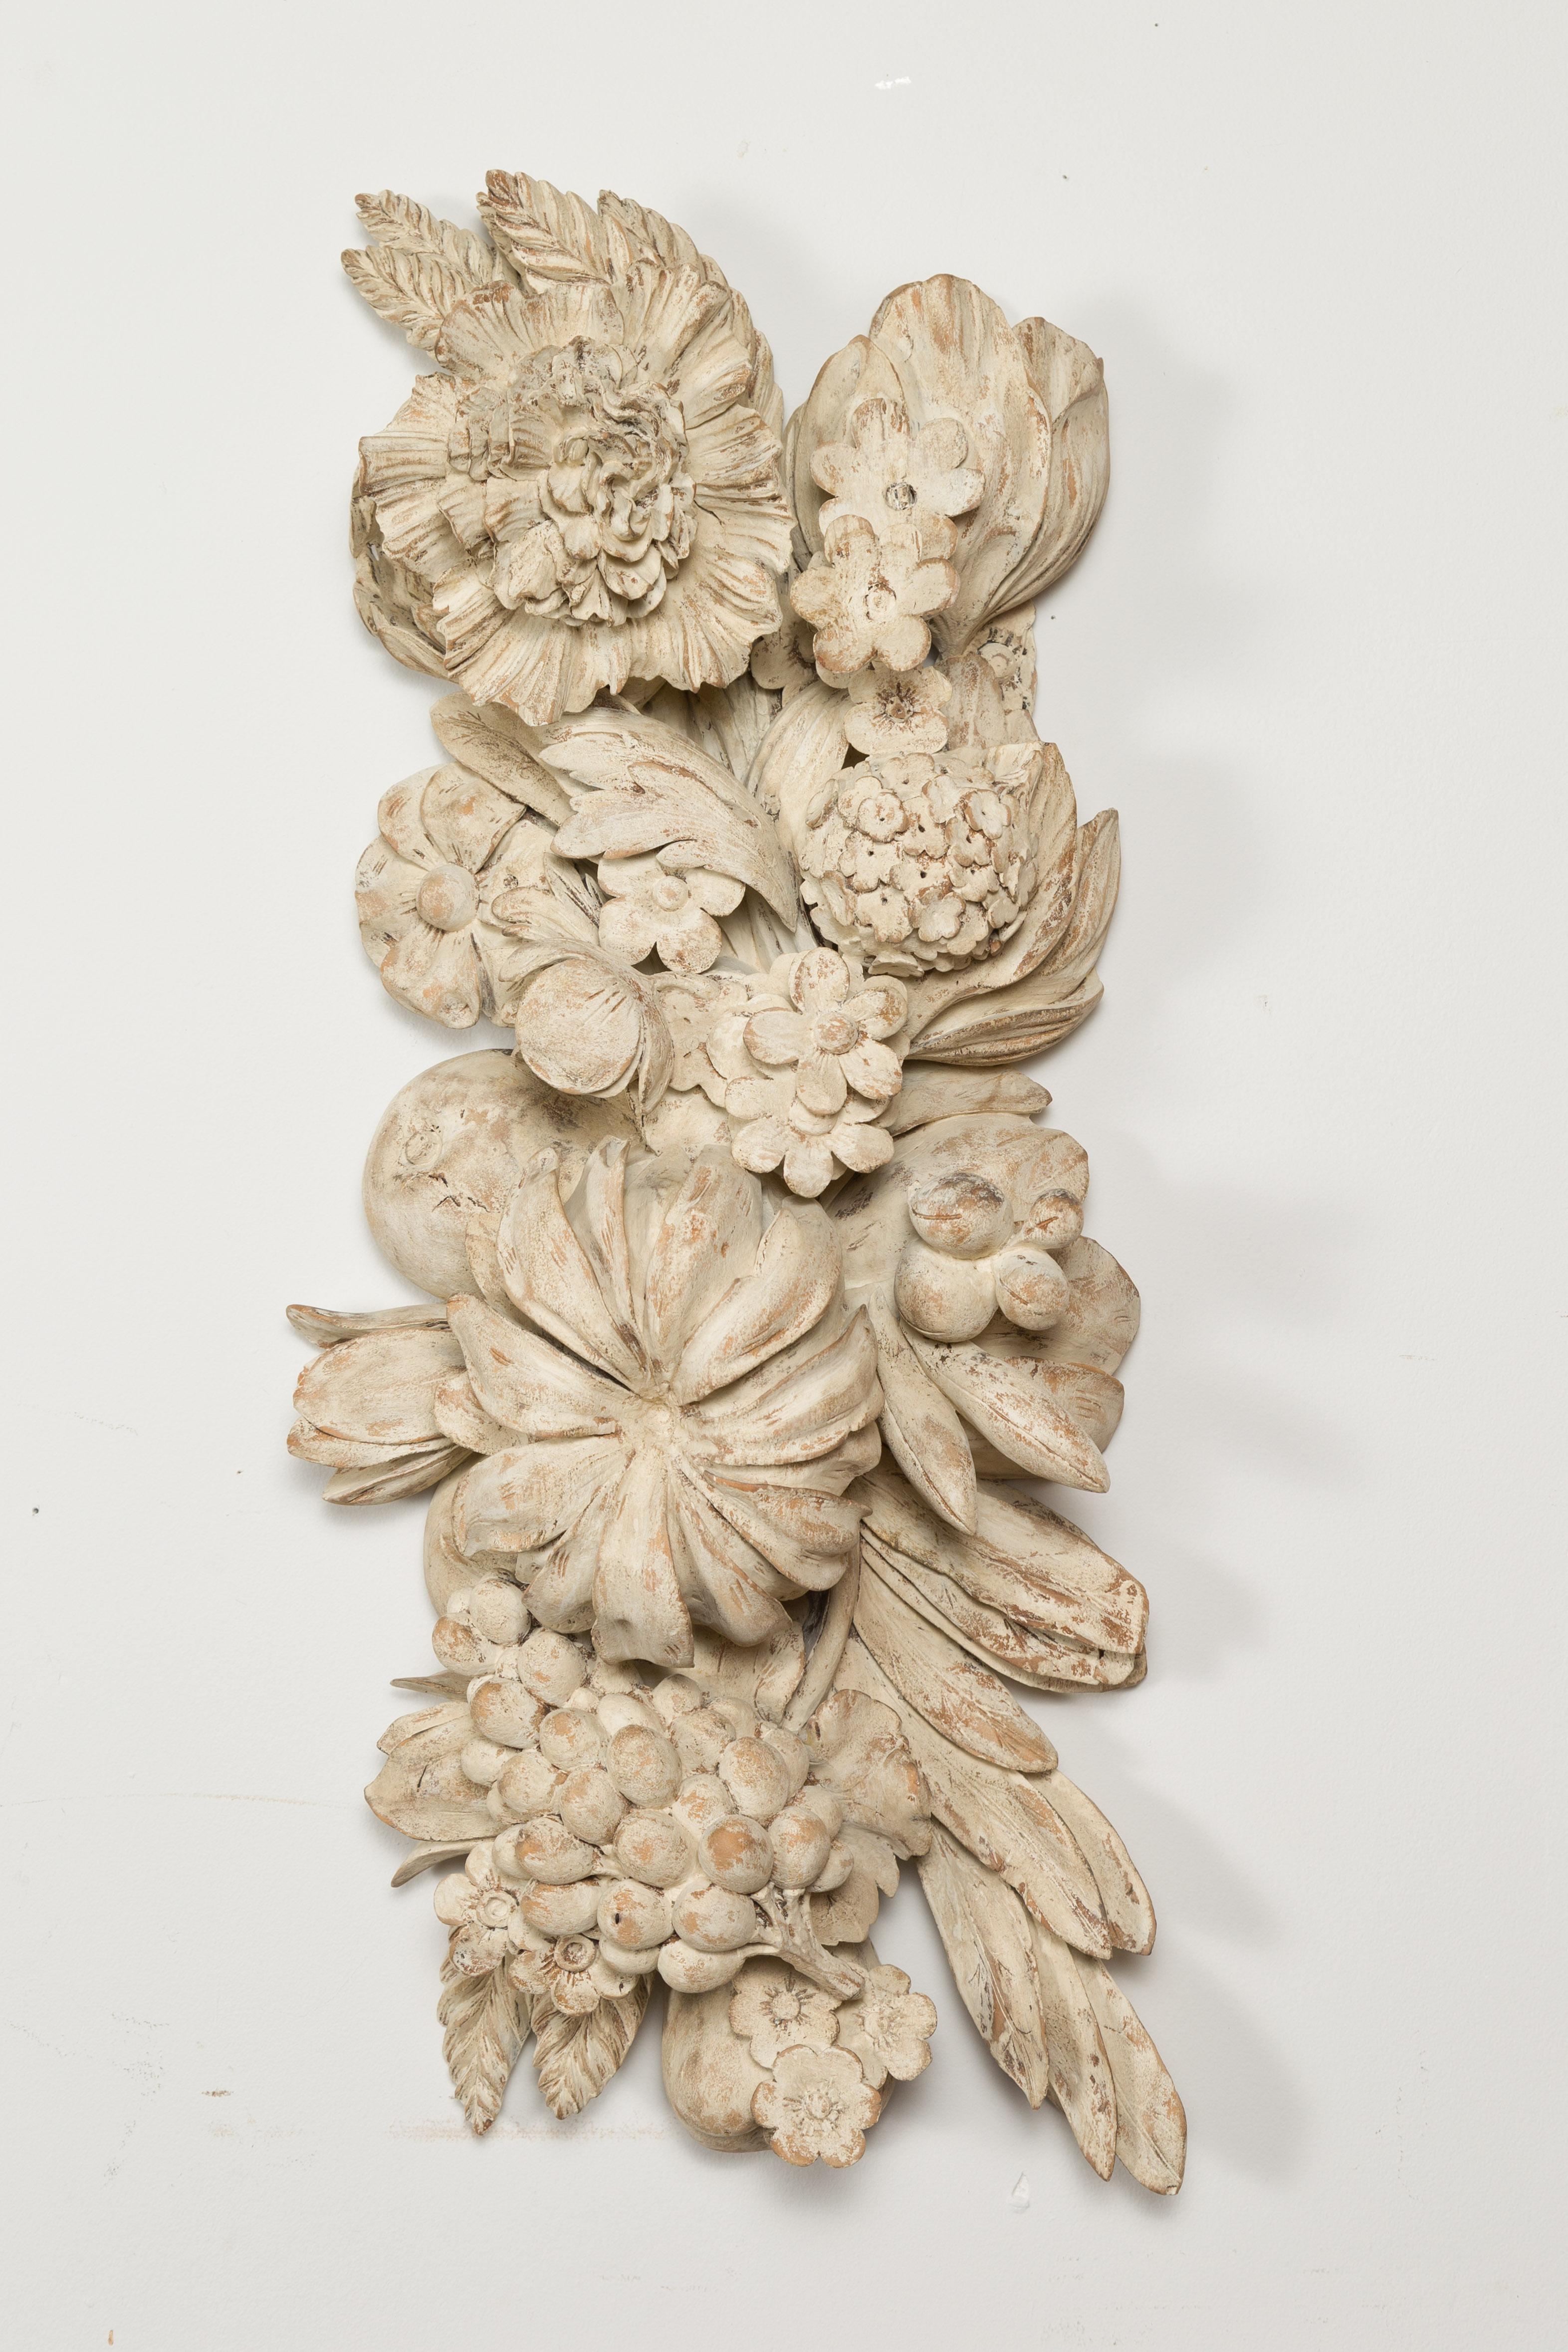 An Italian carved wooden fragment from the 19th century, depicting large fruits and flowers. Created in Italy during the 19th century, this wall fragment features large flowers and fruits on foliage arranged in a joyous composition. Accented with a